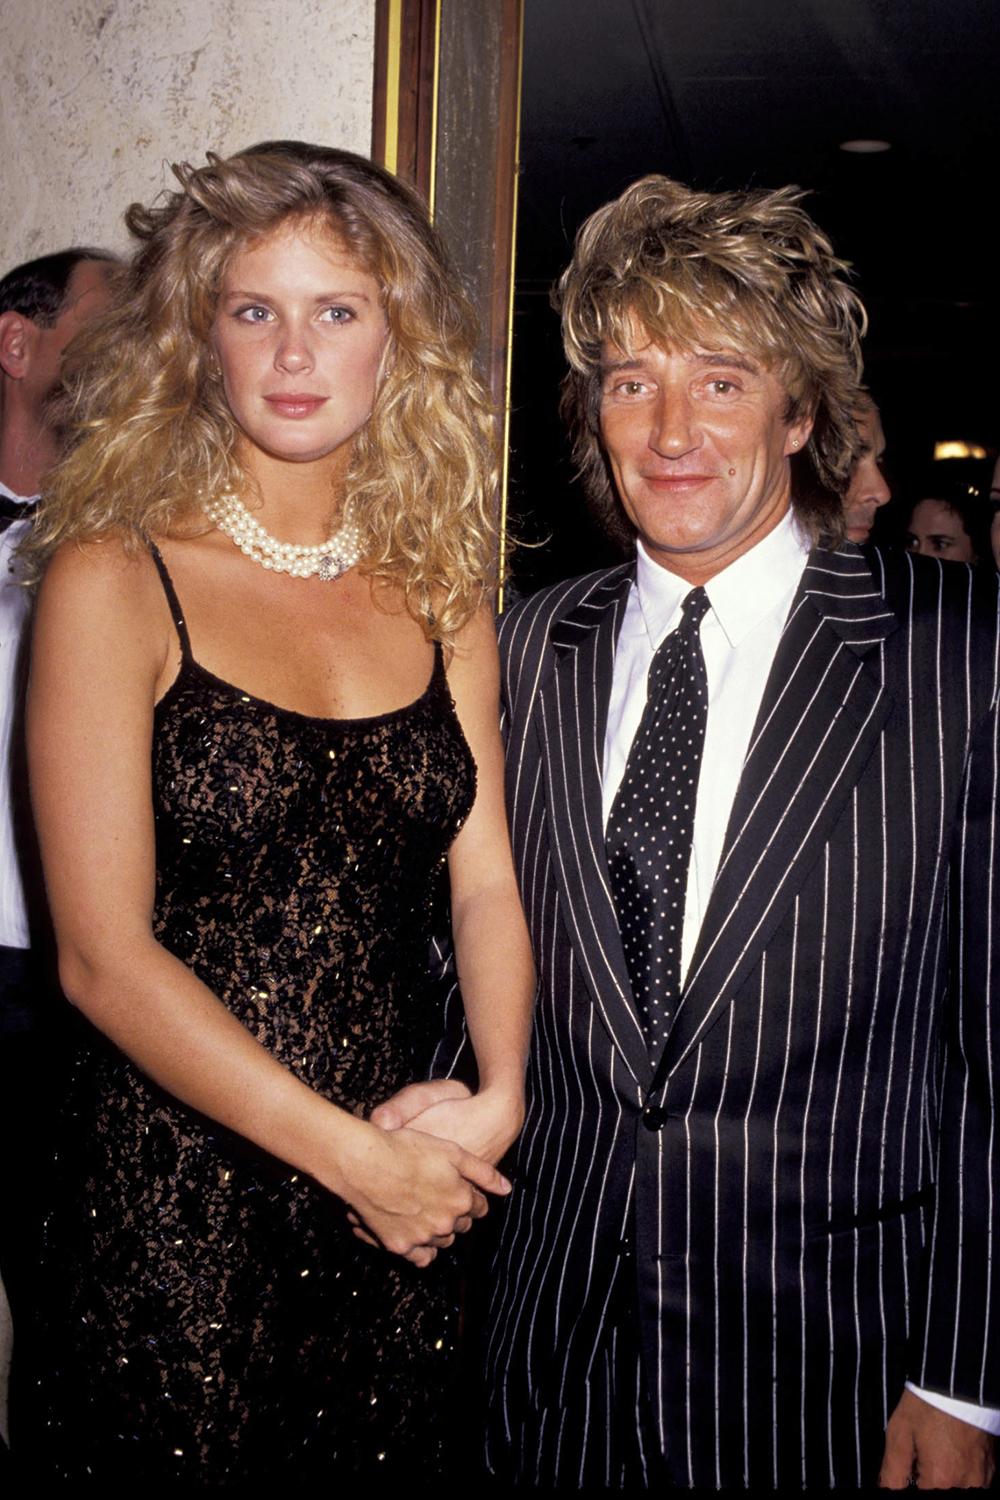 Rod Stewart married Kiwi model Rachel Hunter in 1990. The couple have two children Renee and Liam and divorced in 2006.